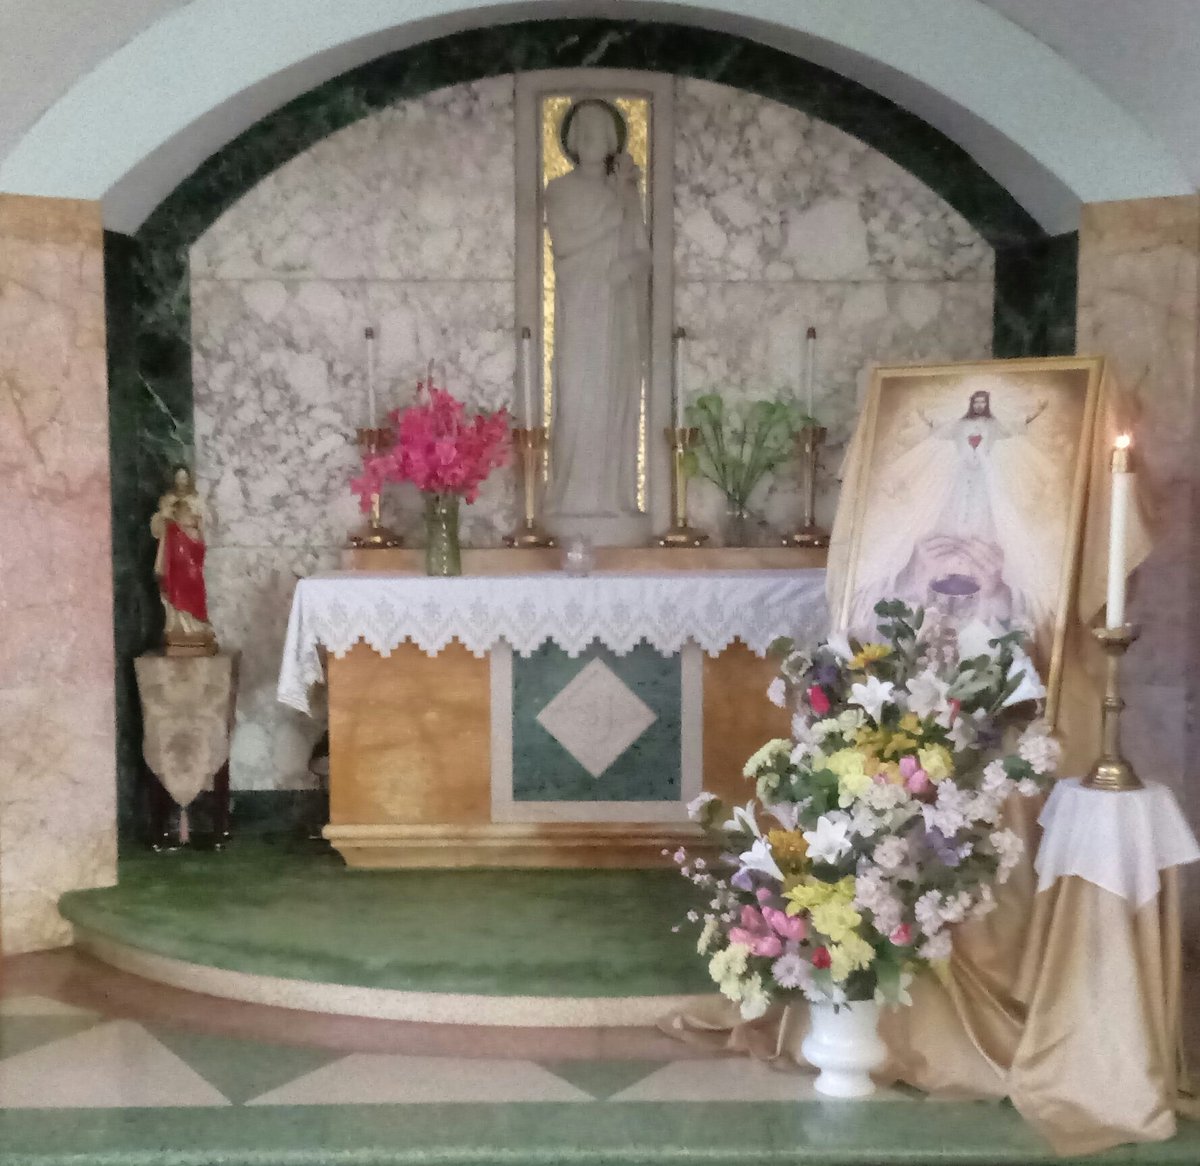 The VietnameseCommunity &       EucharisticJesusMinistries invite you to the
Solemn Feast of Our Lady of LaVang & Solemn Installation & Blessing of
'The Bread Of Life' image
October 7, 2018
ProcessionOfOurLady
2pm
HolyMass&Installation 2:30pm
#StAliceChurch
#UpperDarbyPA
Plz #RT